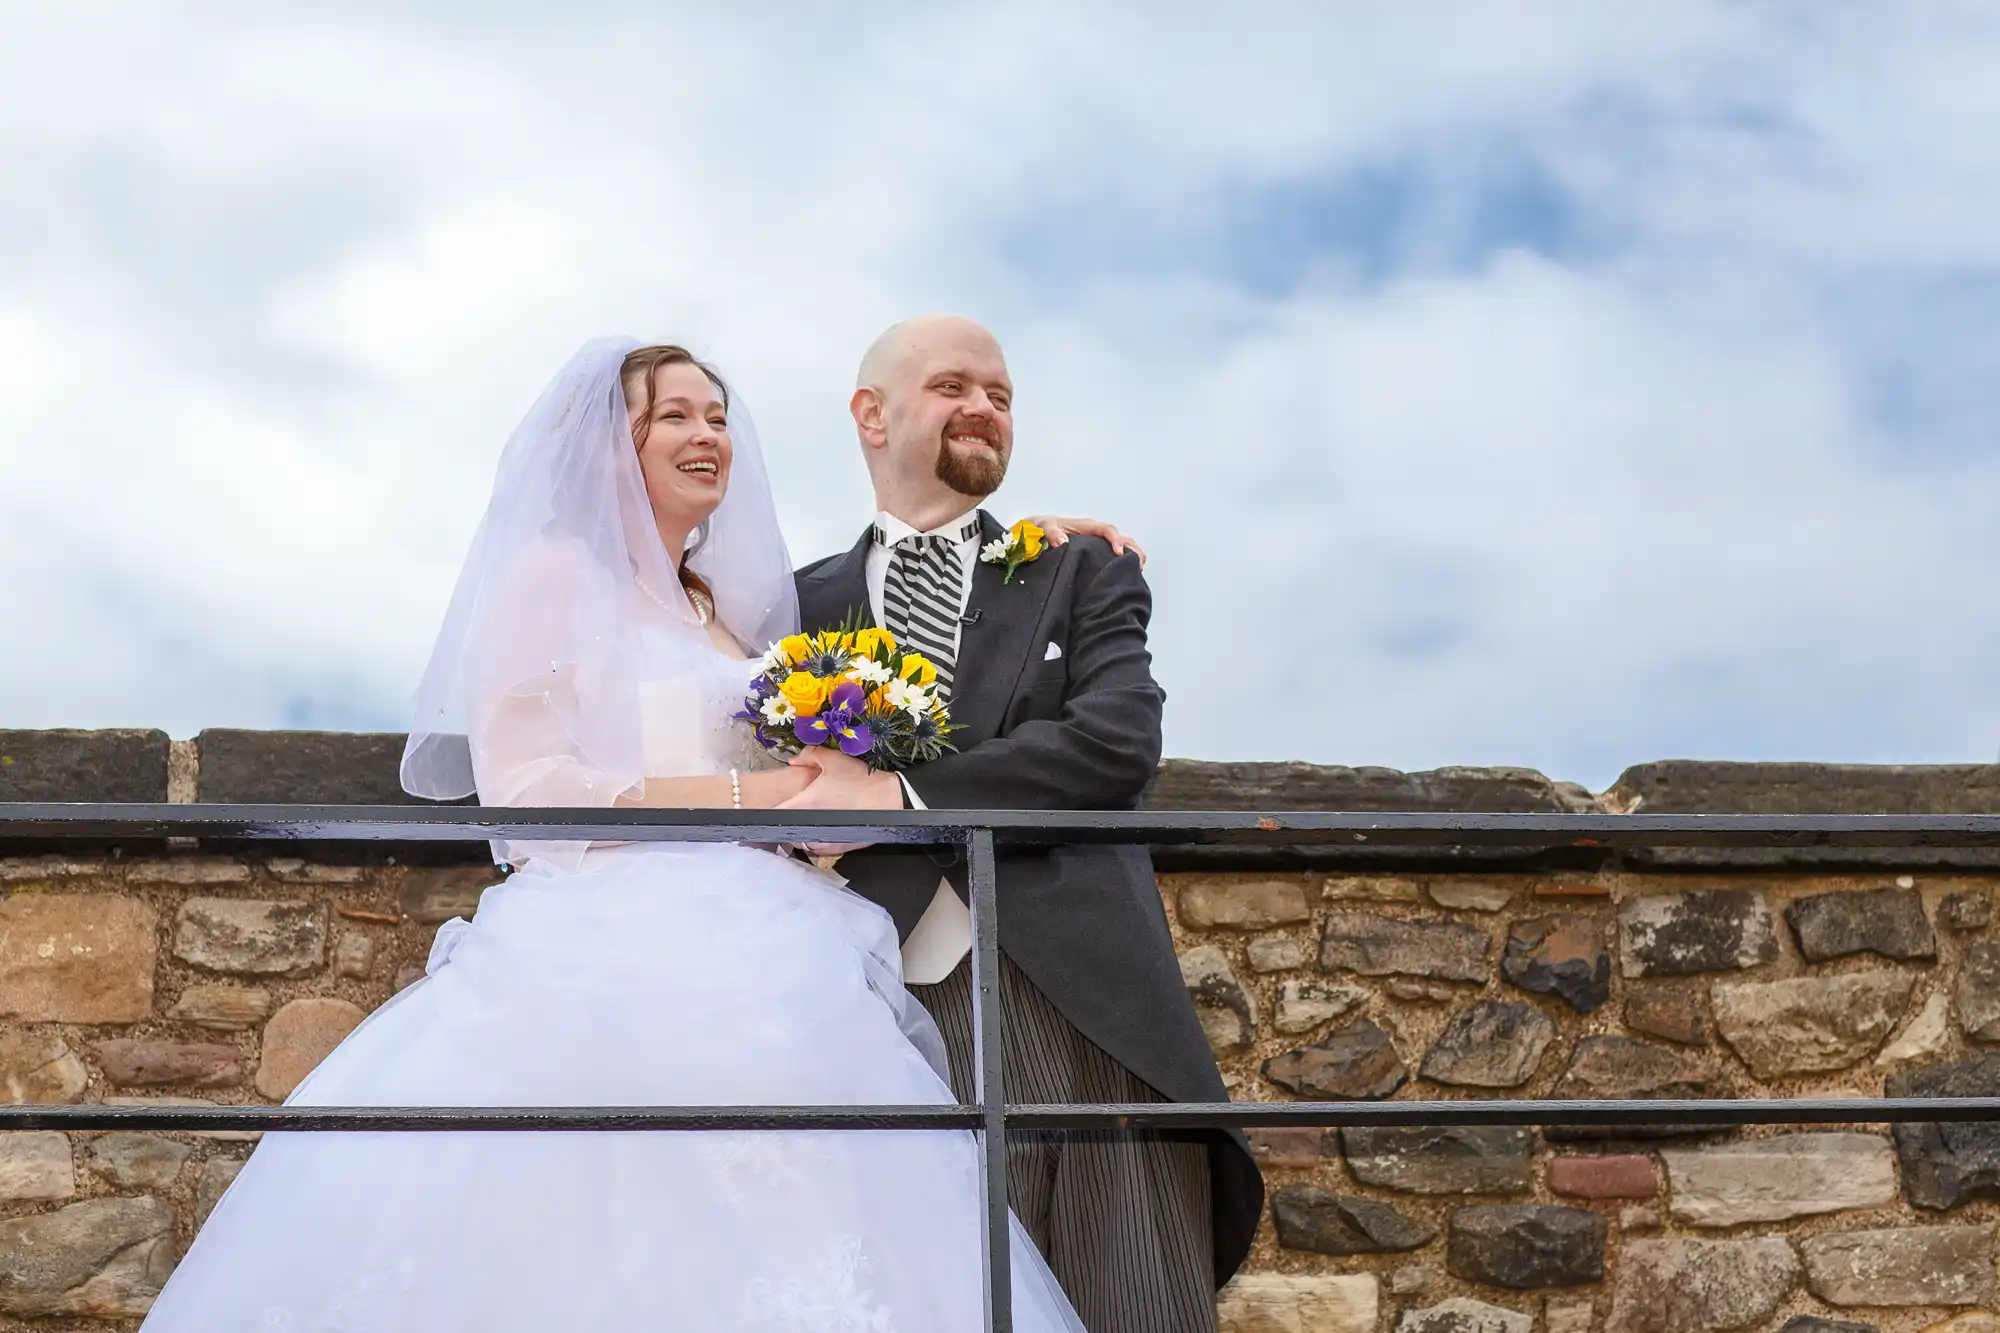 A joyous bride and groom, dressed in traditional wedding attire, laugh together on a stone balcony under a cloudy sky.